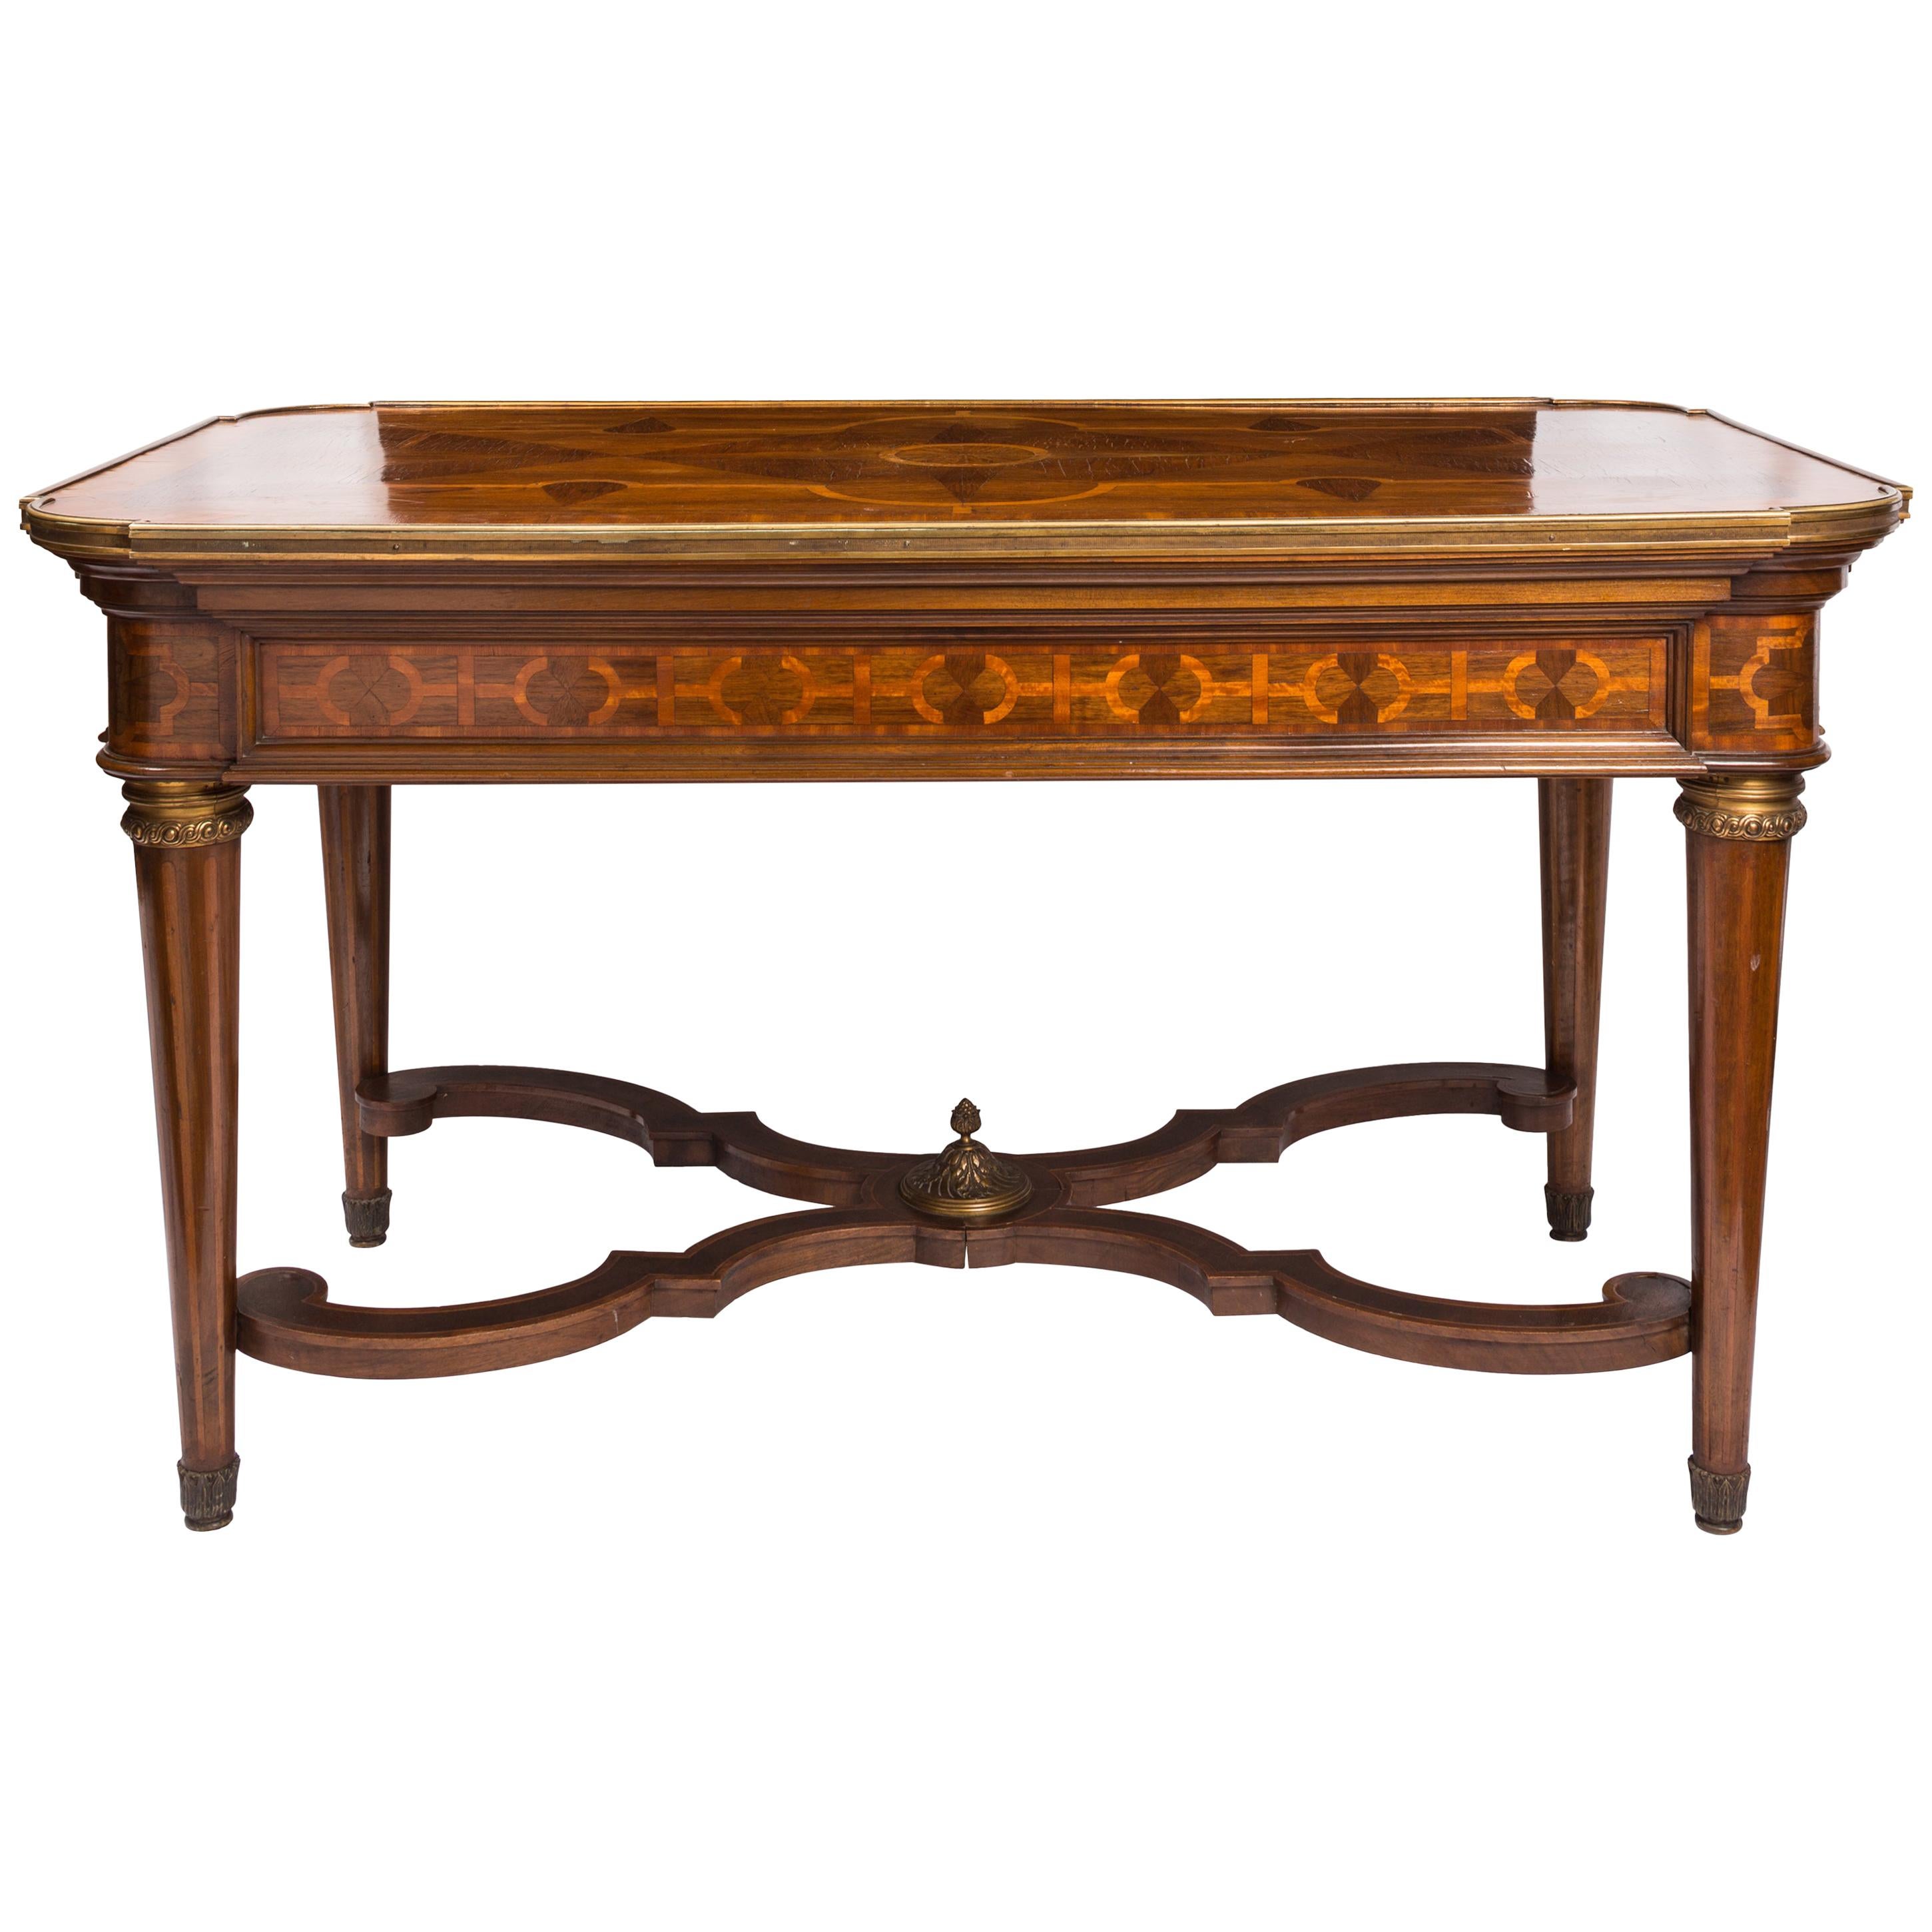 Louis XVI Style Table with Geometric Wood Marquetry and Brass Detailing For Sale